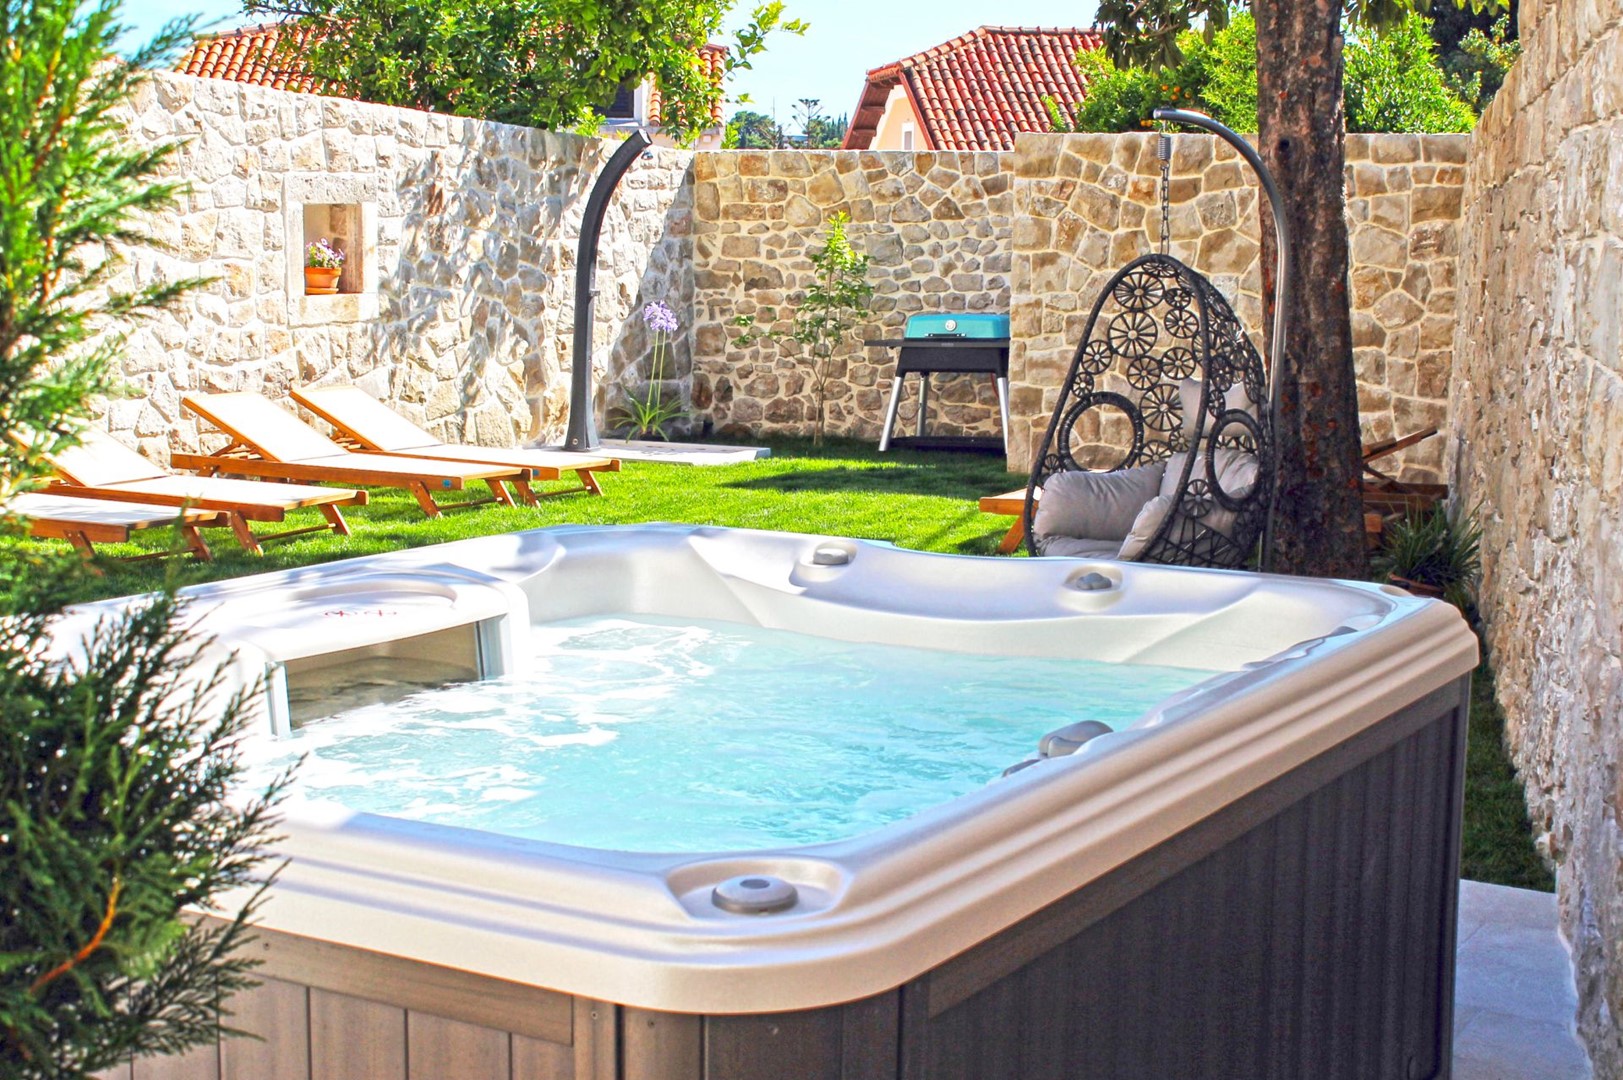 Private fenced property of the luxury Croatian villa Cavtat Iliria with jacuzzi and private garden in the center of Cavtat